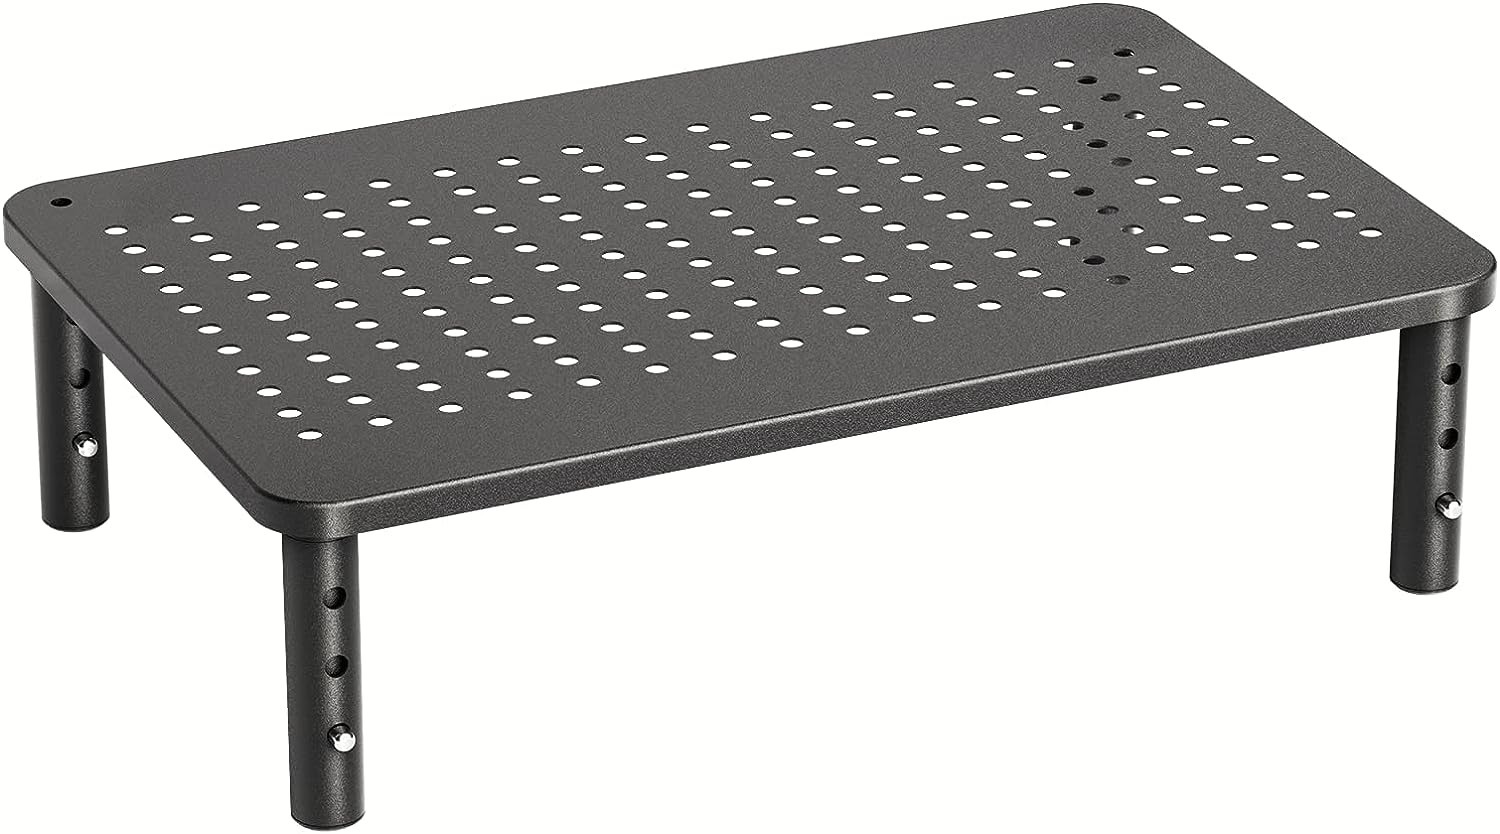 Huanuo Adjustable Metal Monitor Stand Riser $6 + Free Shipping w/ Prime or Orders $35+